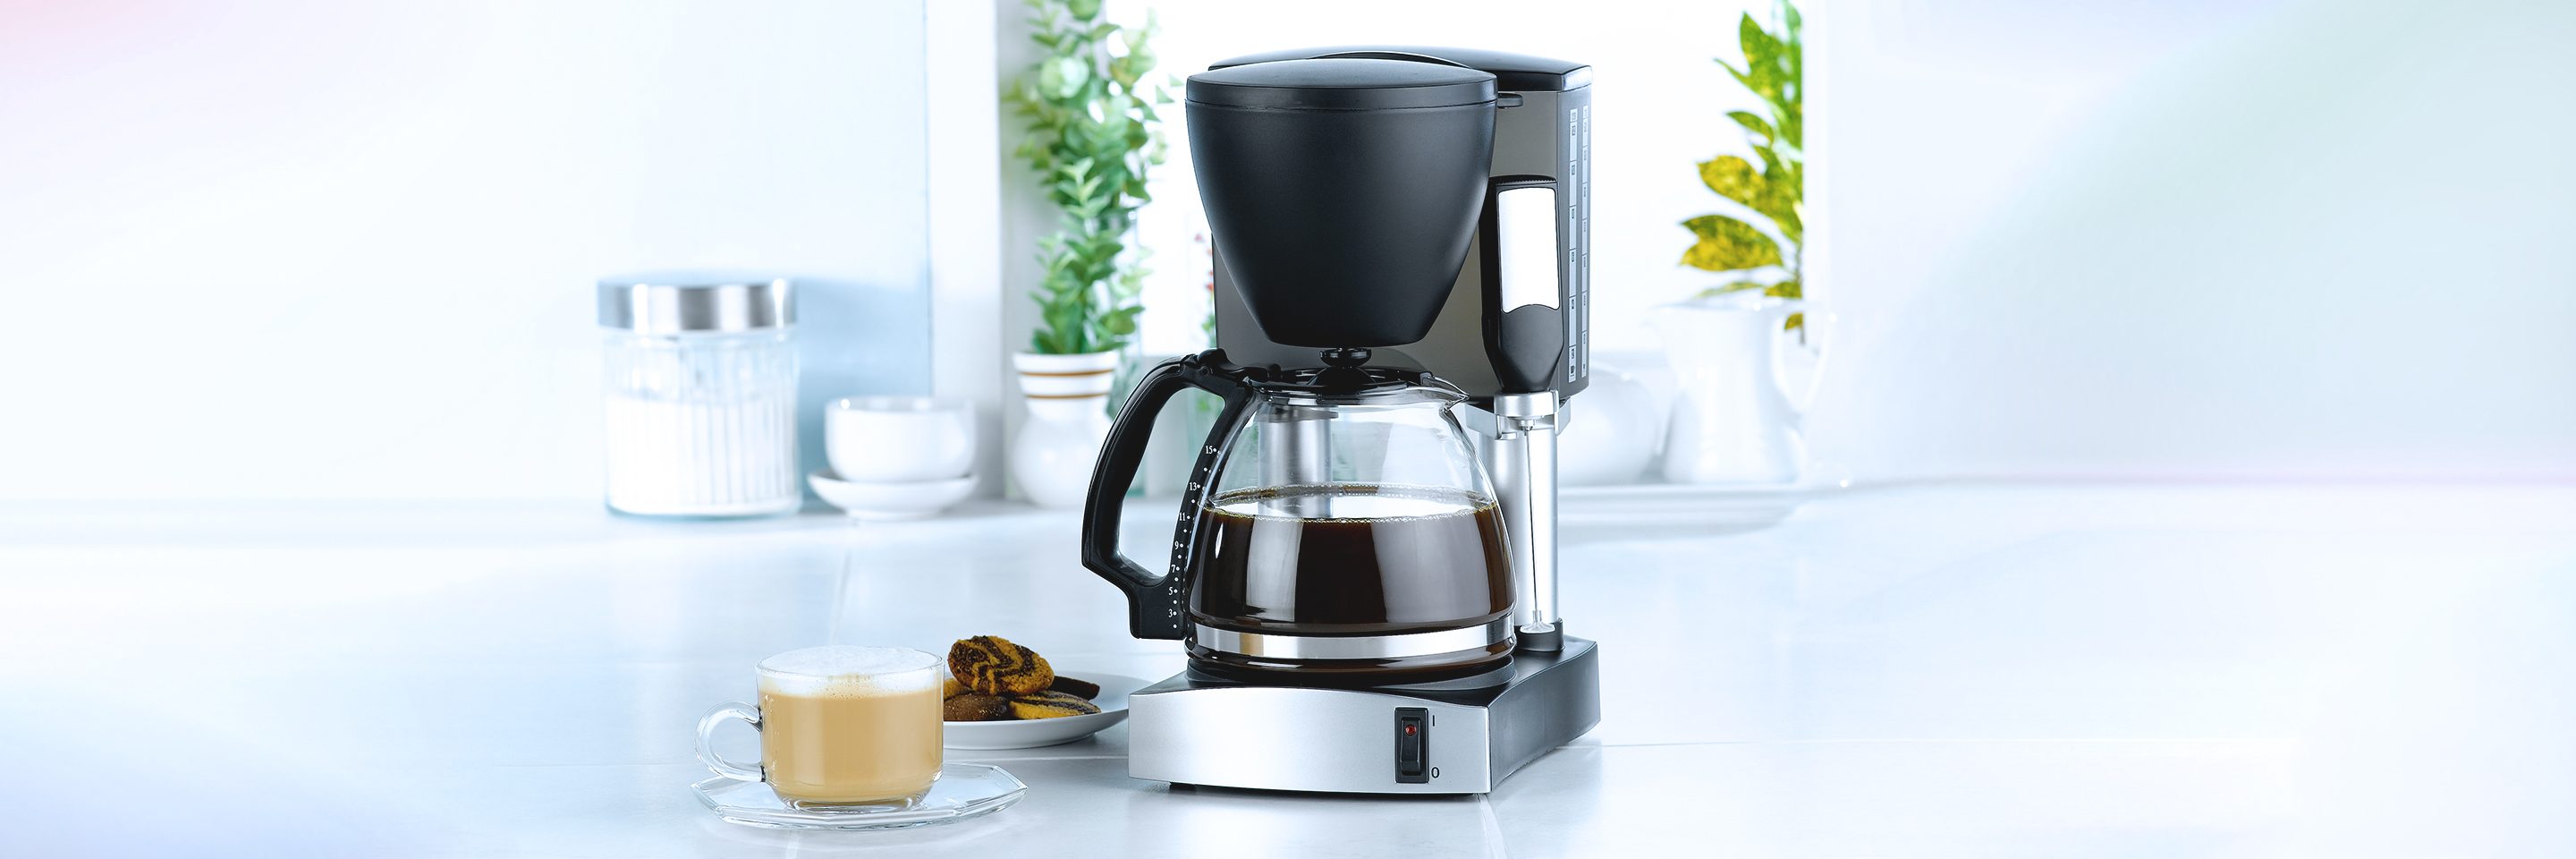 Home Coffee Makers	